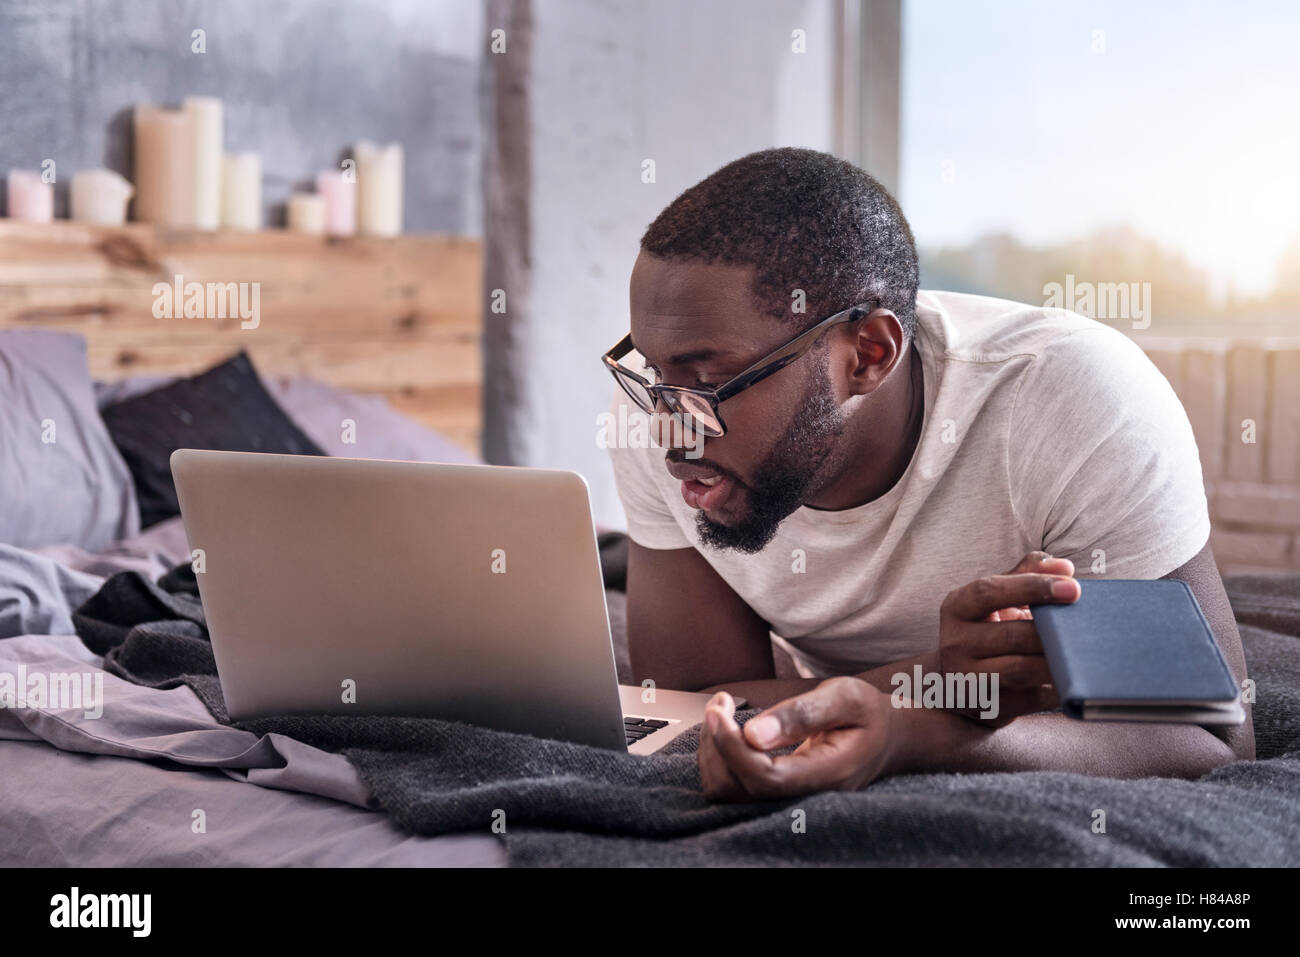 African man looking at his laptop Stock Photo